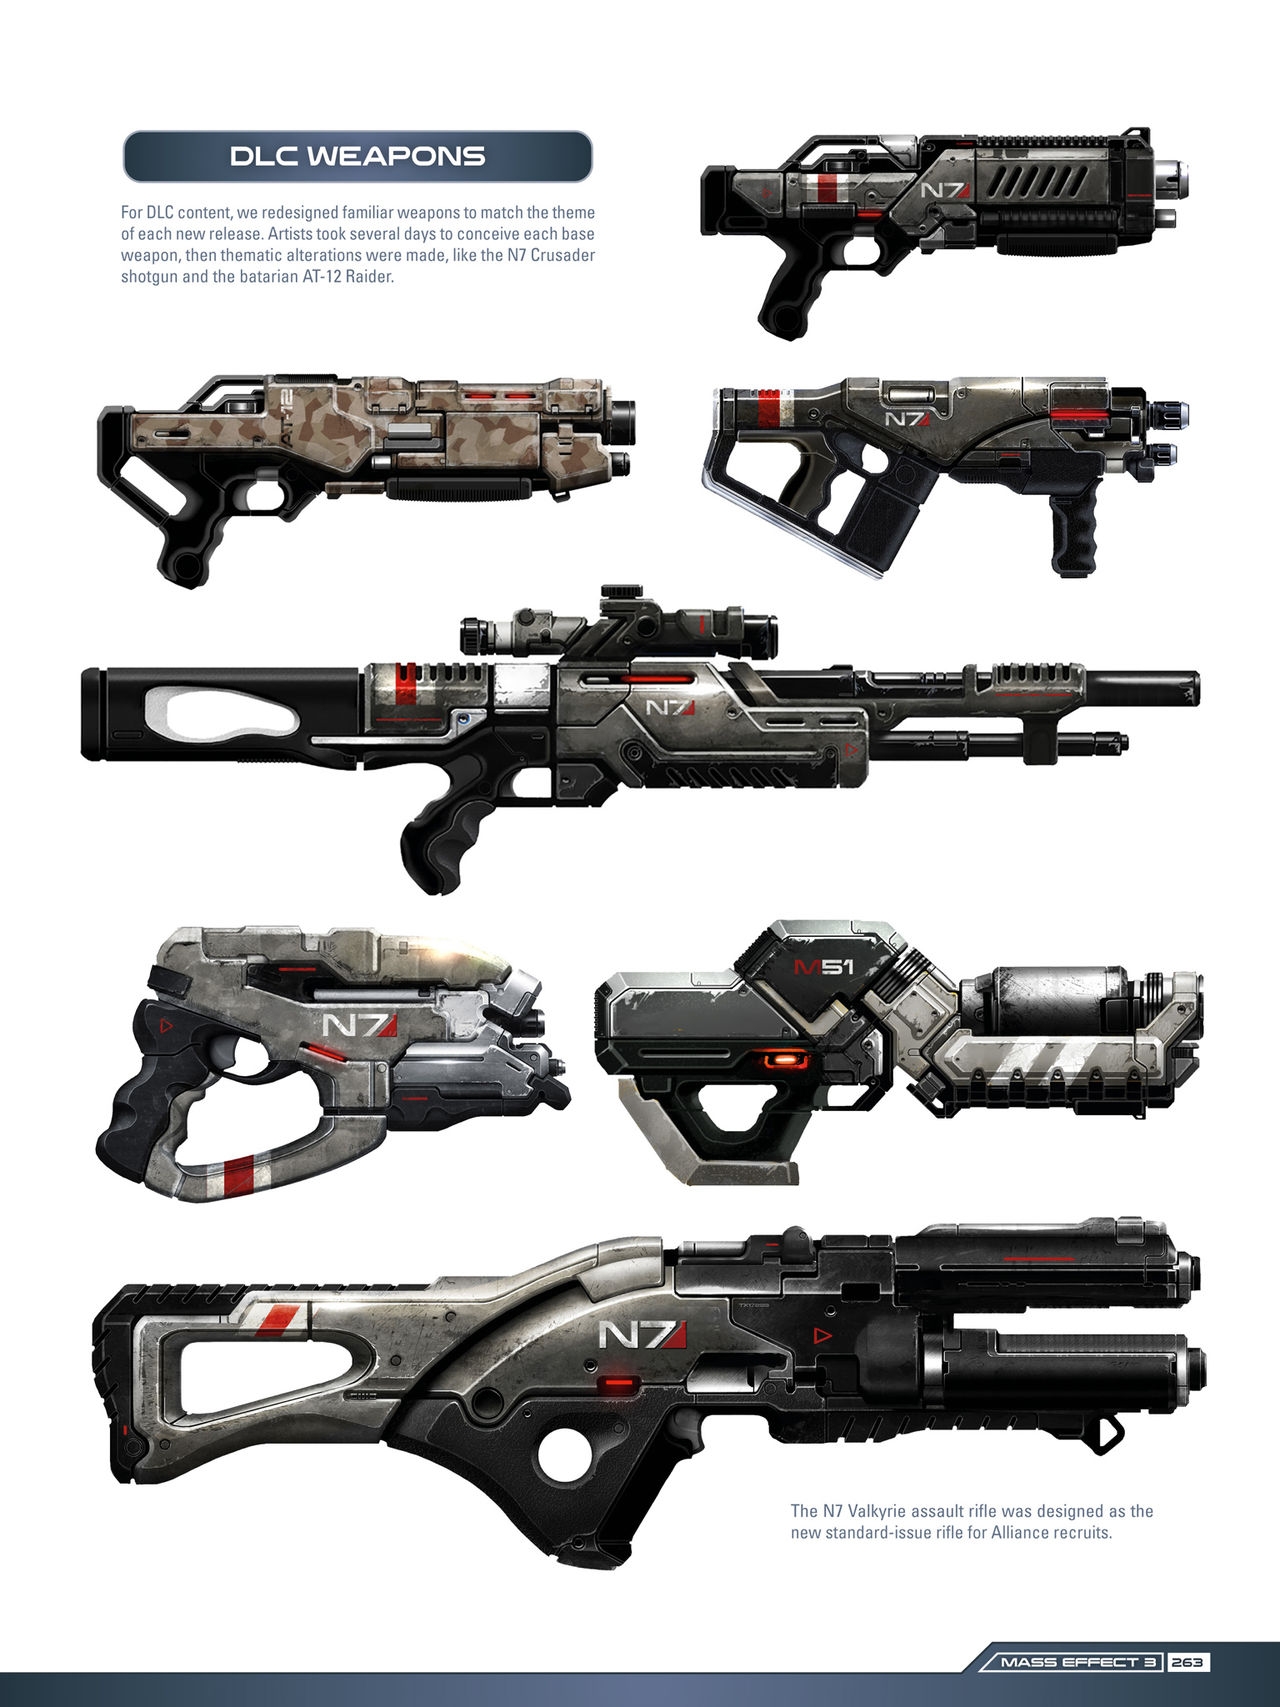 The Art of the Mass Effect Trilogy - Expanded Edition 262